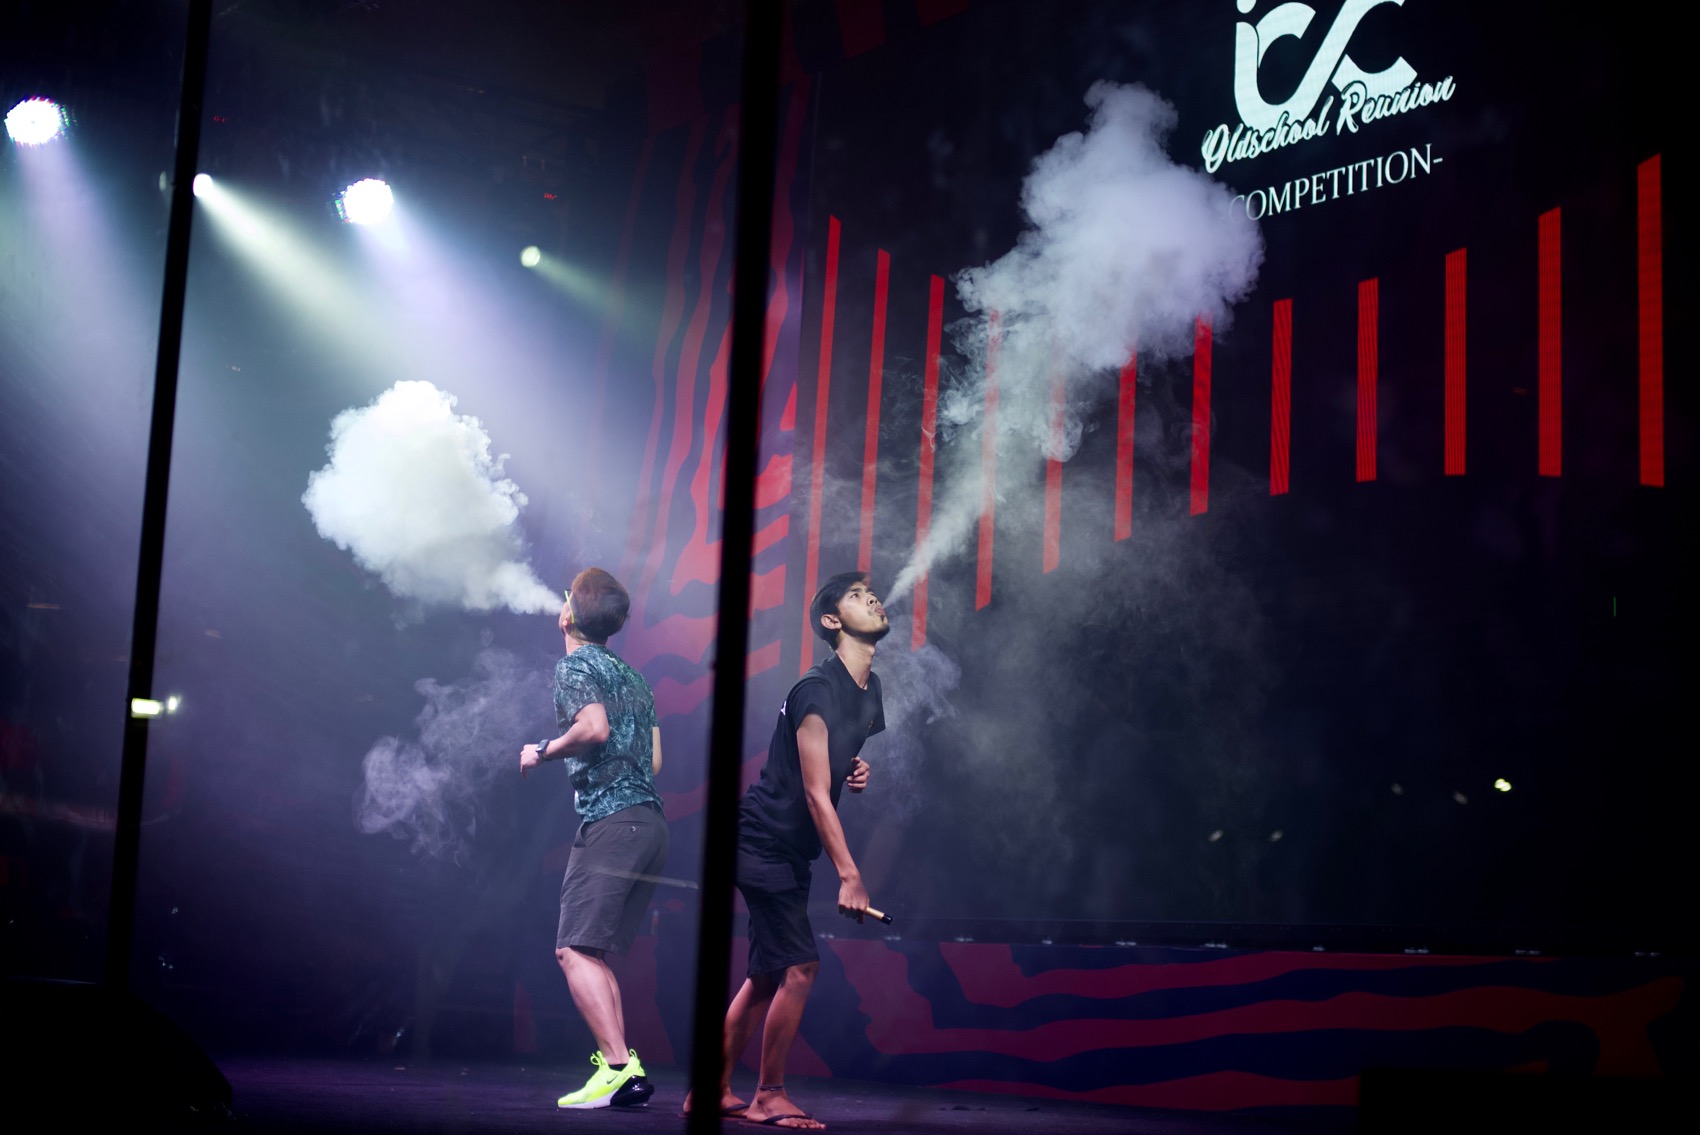 Long-time Indonesian vapers reunite and compete each other in a cloud-chasing competition during the Sept. 8-9 2018 Vape Fair in Jakarta. 